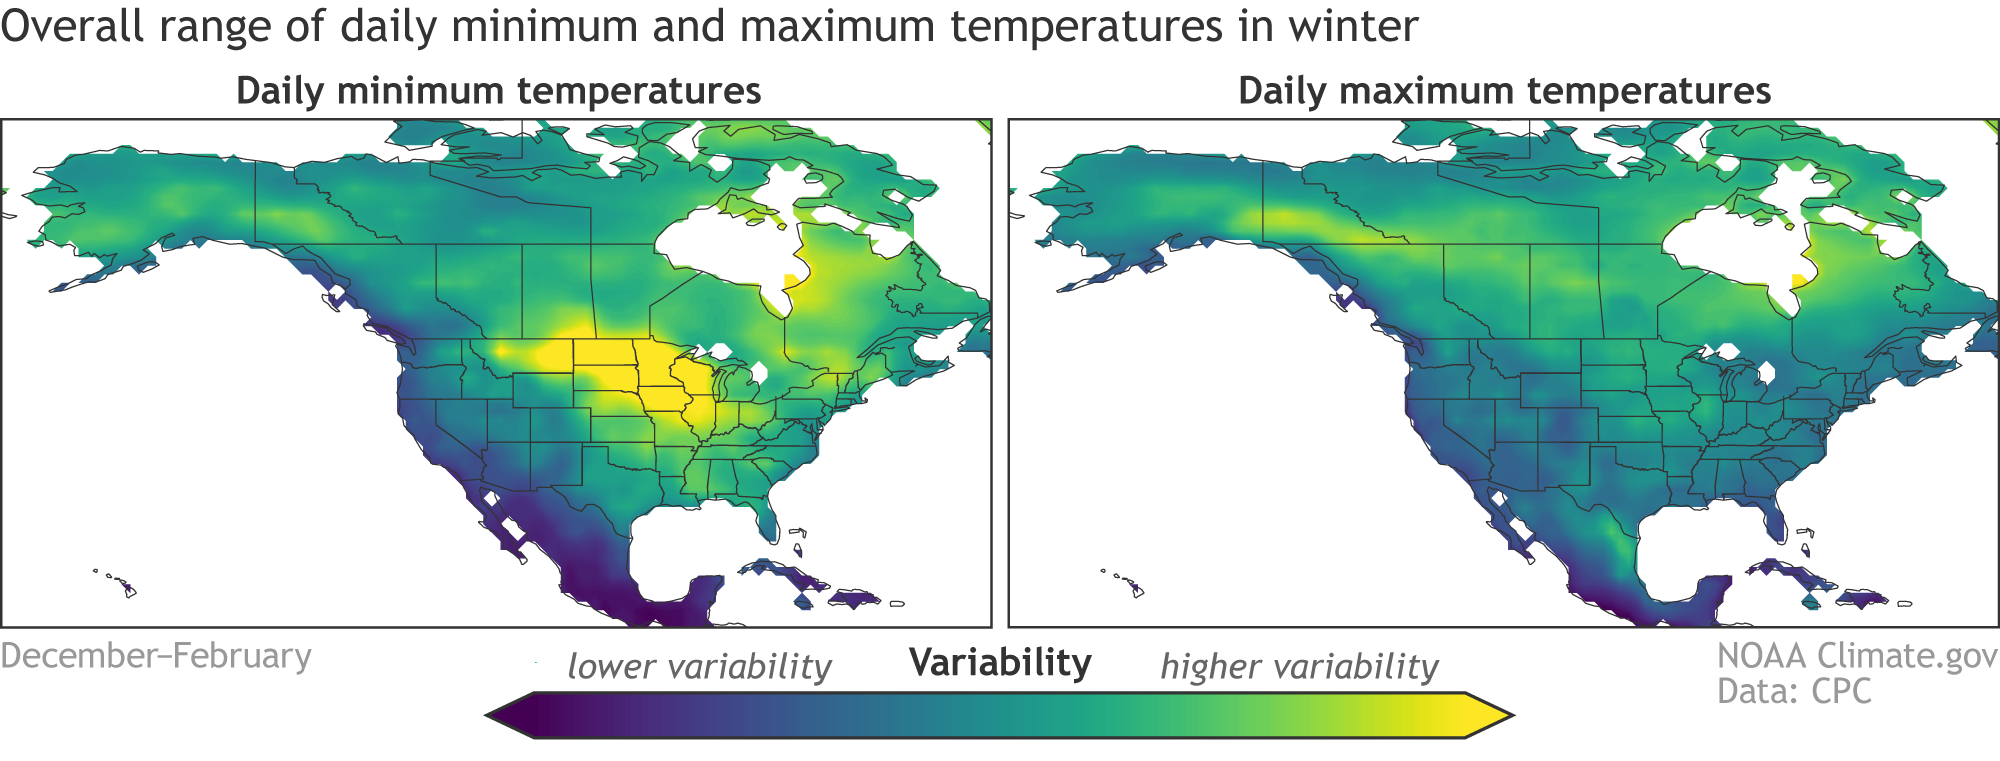 Two pane image showing daily high and low temperature variability in winter for North America. Blue to green to yellow indicate low to average to high variability. 